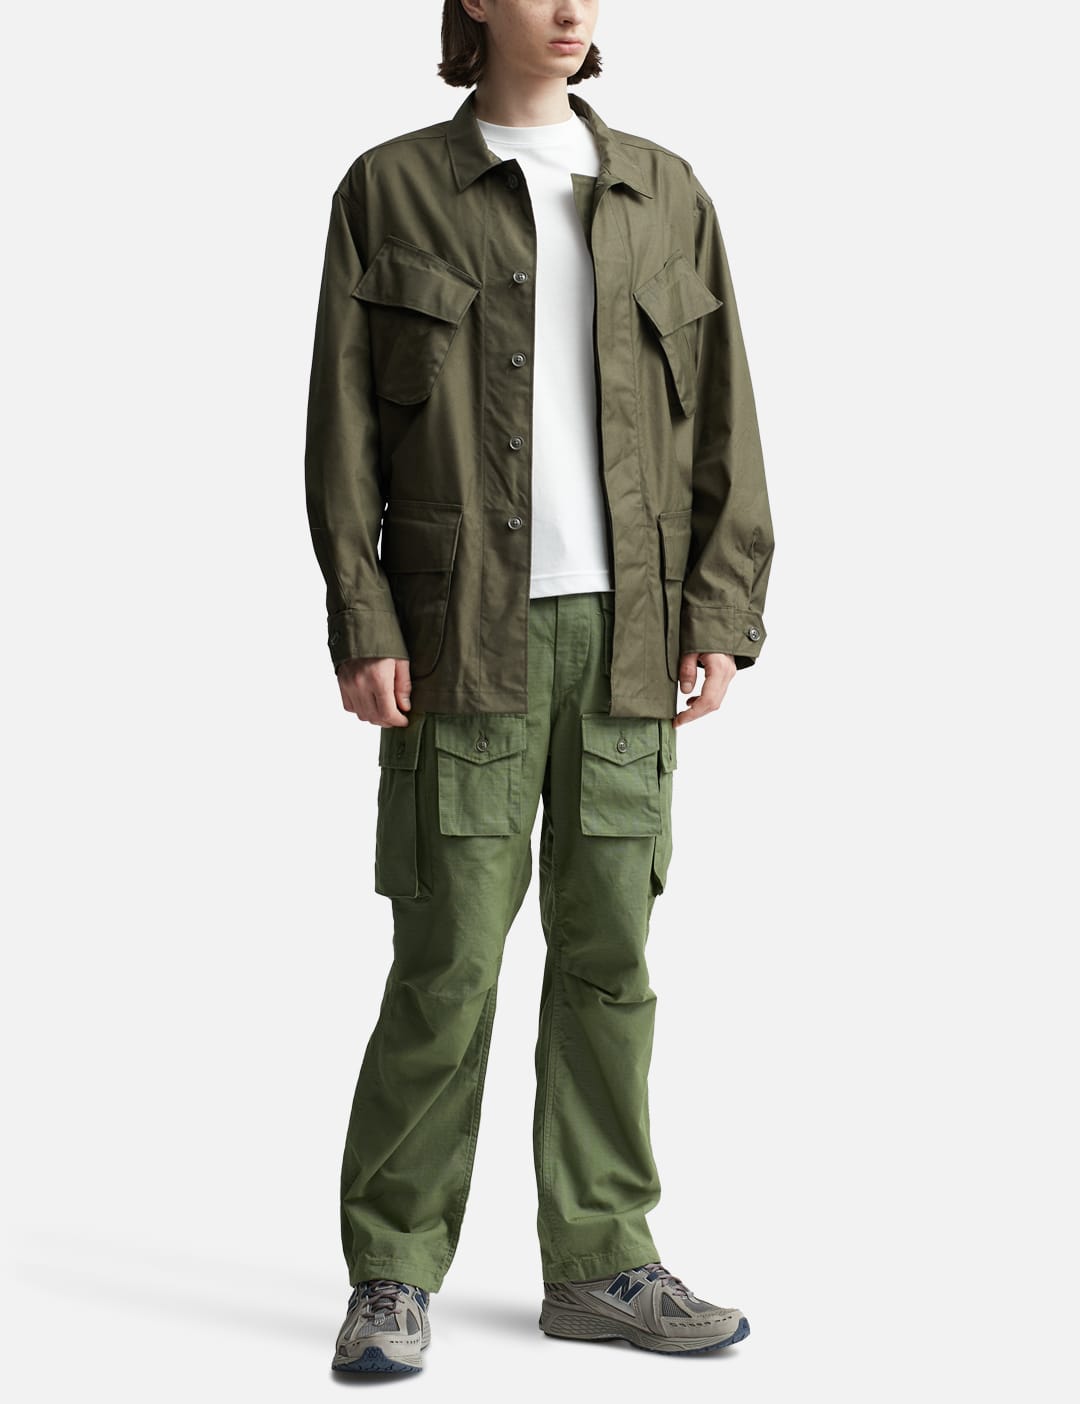 Engineered Garments - FA PANT | HBX - Globally Curated Fashion and 